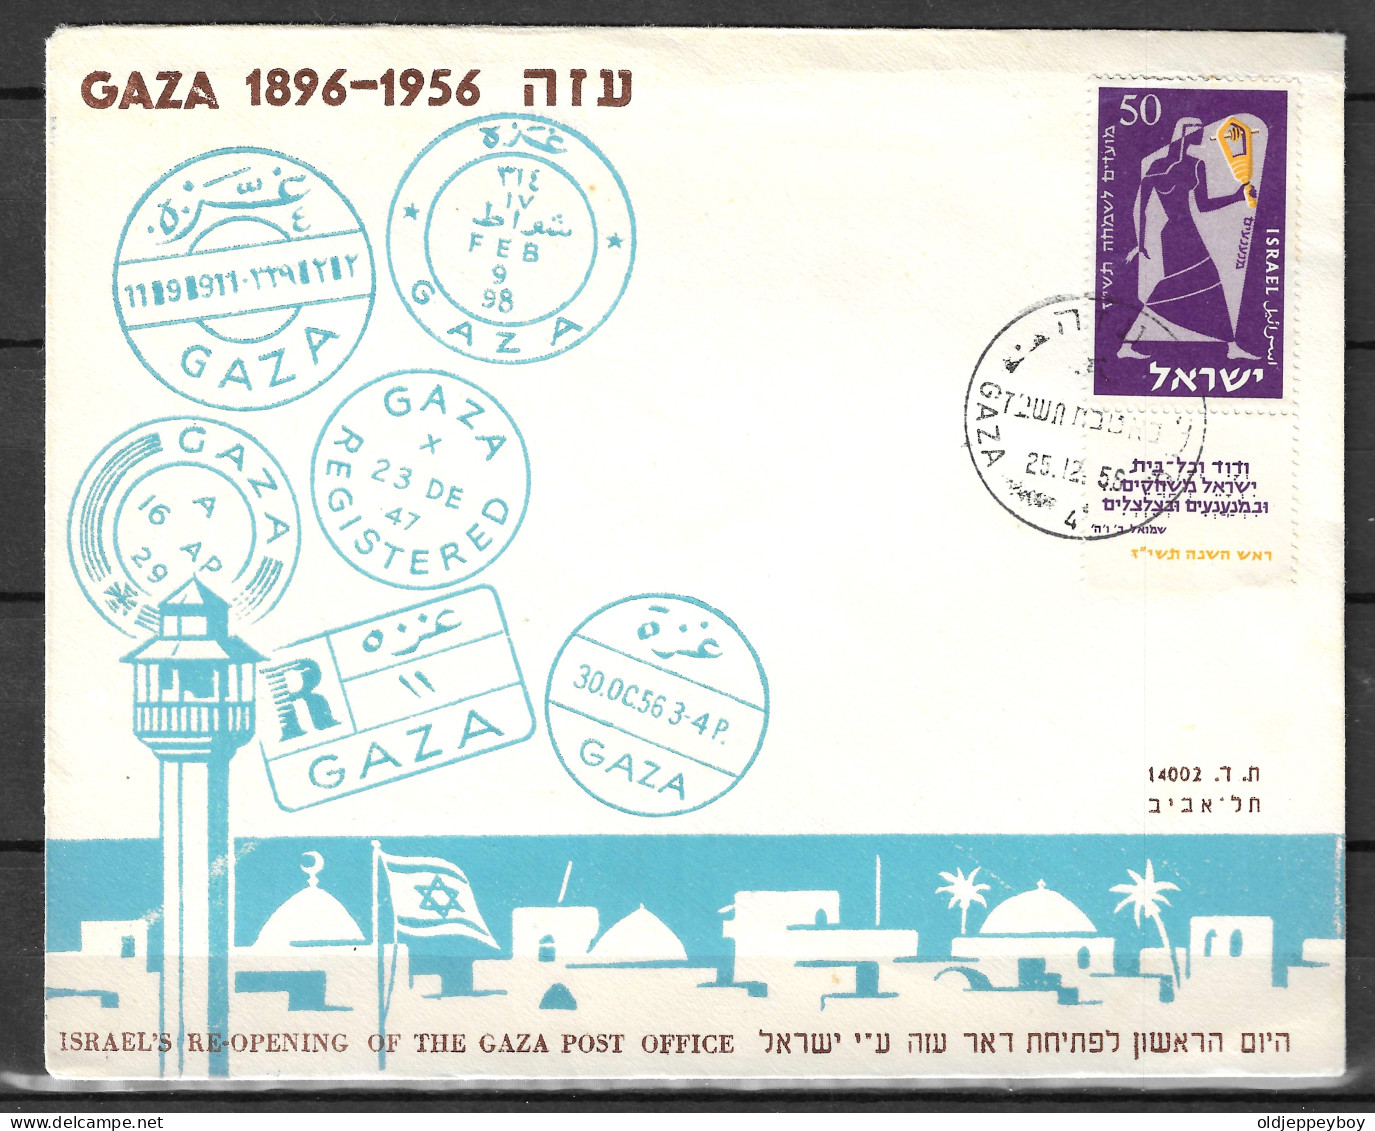 1956 POO FIRST DAY POST OFFICE OPENING PALESTINE GAZA STRIP MAIL STAMP ENVELOPE ISRAEL JUDAICA CACHET COVER - Briefe U. Dokumente